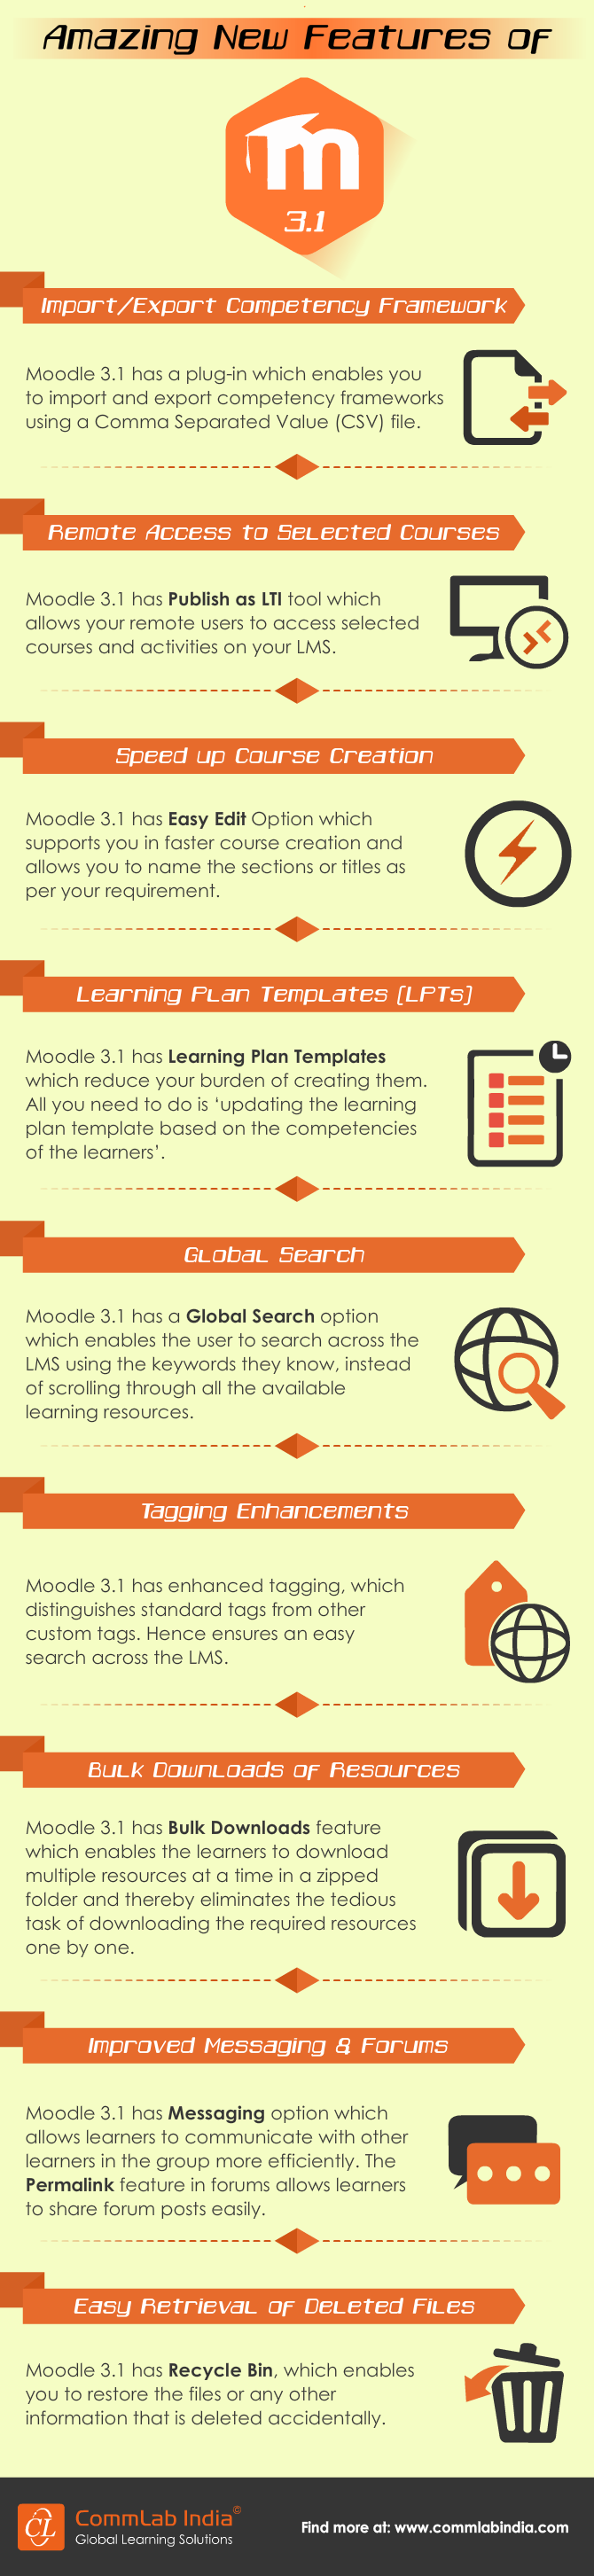 The Amazing New Features of Moodle 3.1 [Infographic]